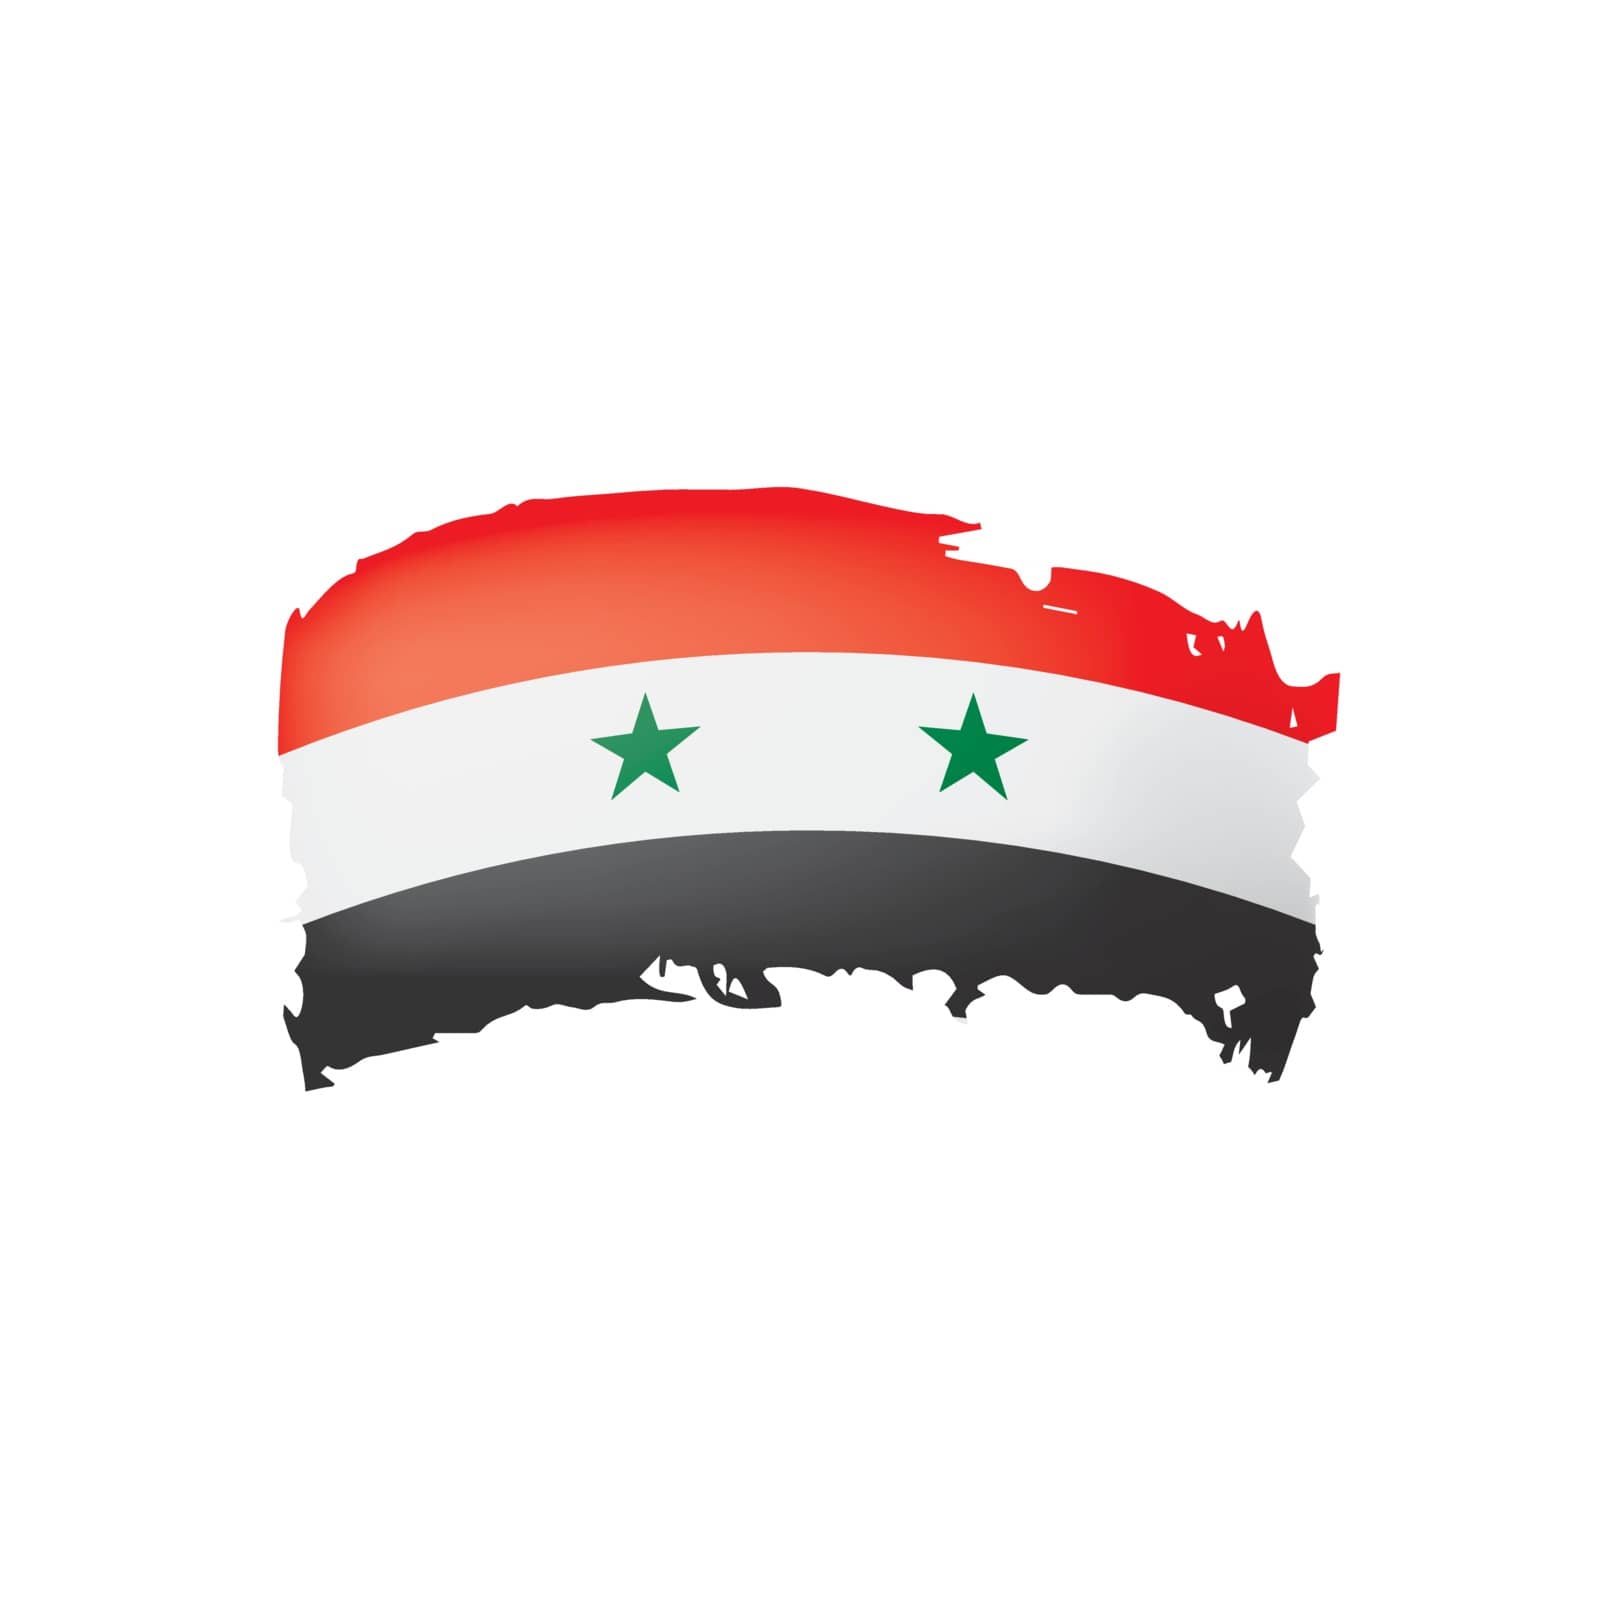 Syria flag, vector illustration on a white background. by butenkow